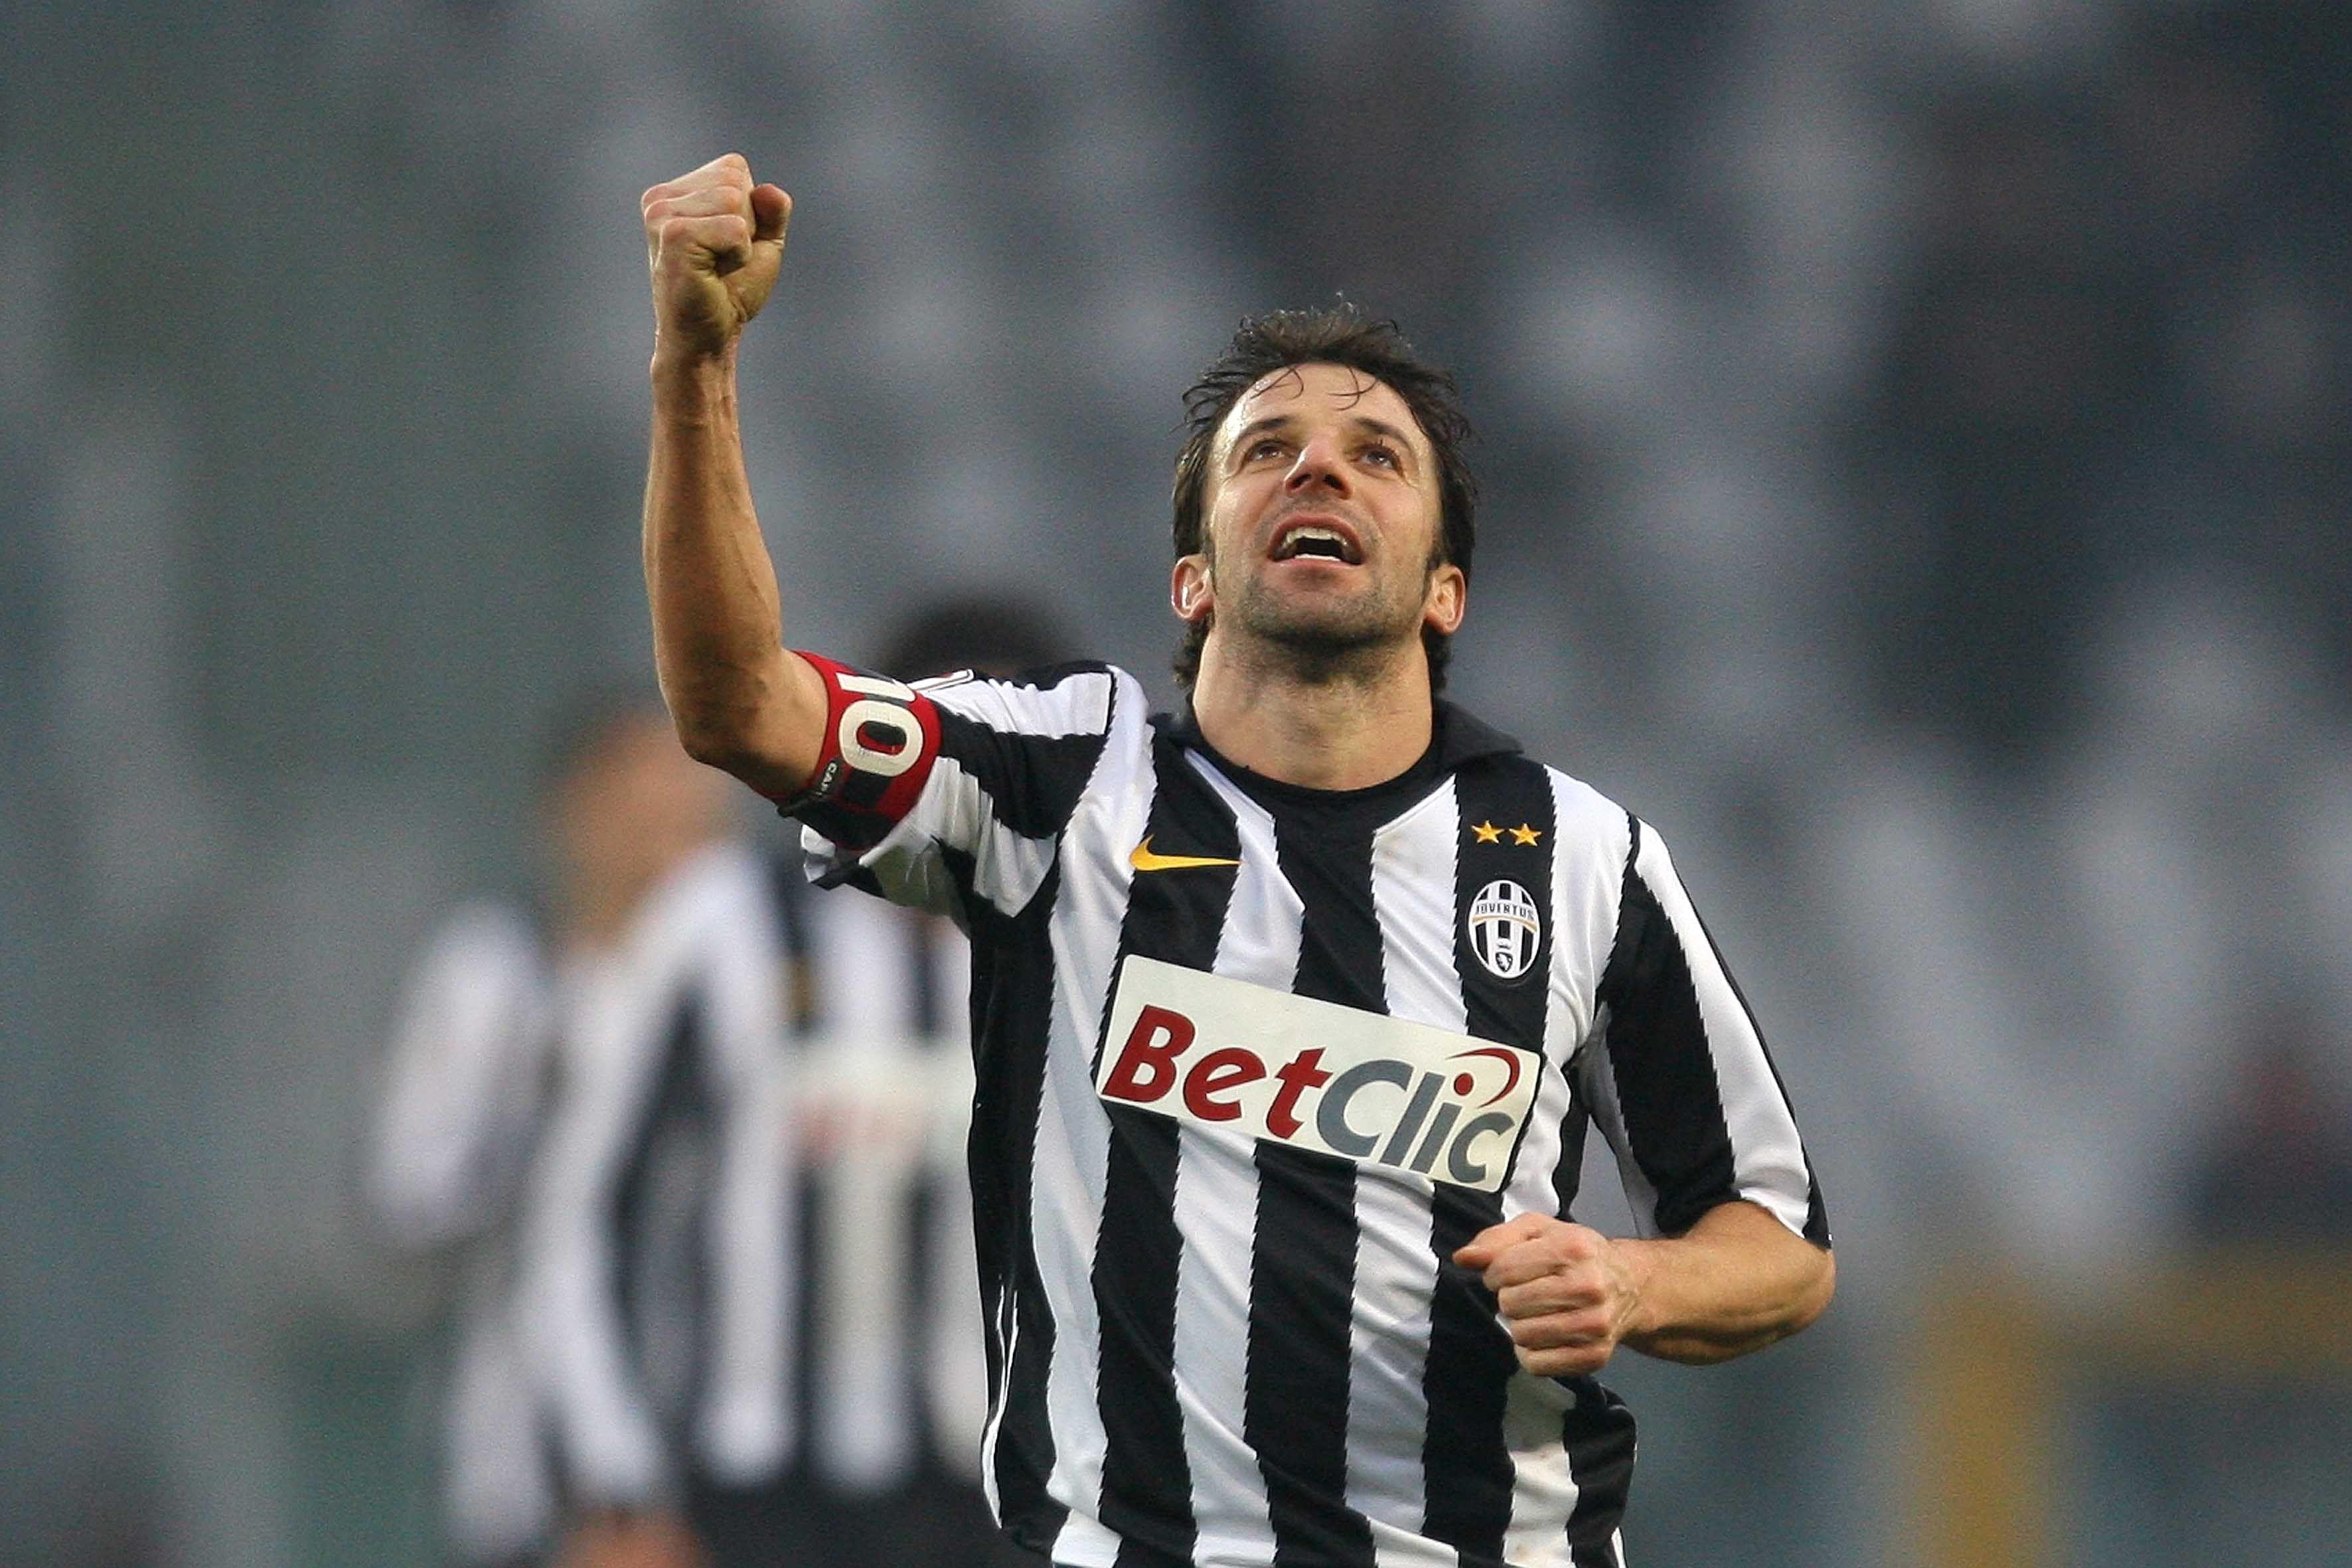 The football player of Sydney Alessandro Del Piero won the game